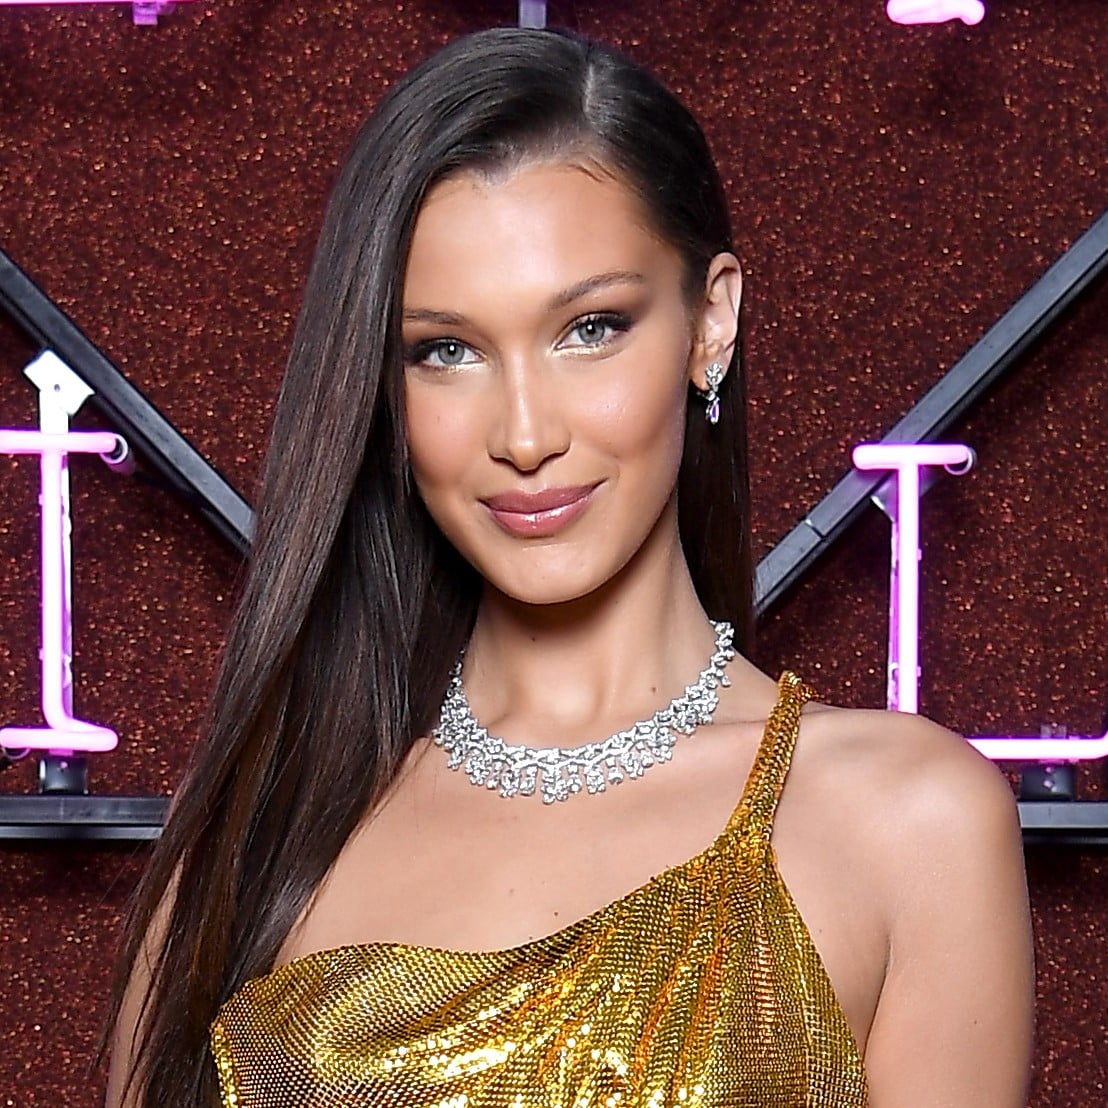 Bella Hadid’s Net Worth: How Much She Got Paid Today?